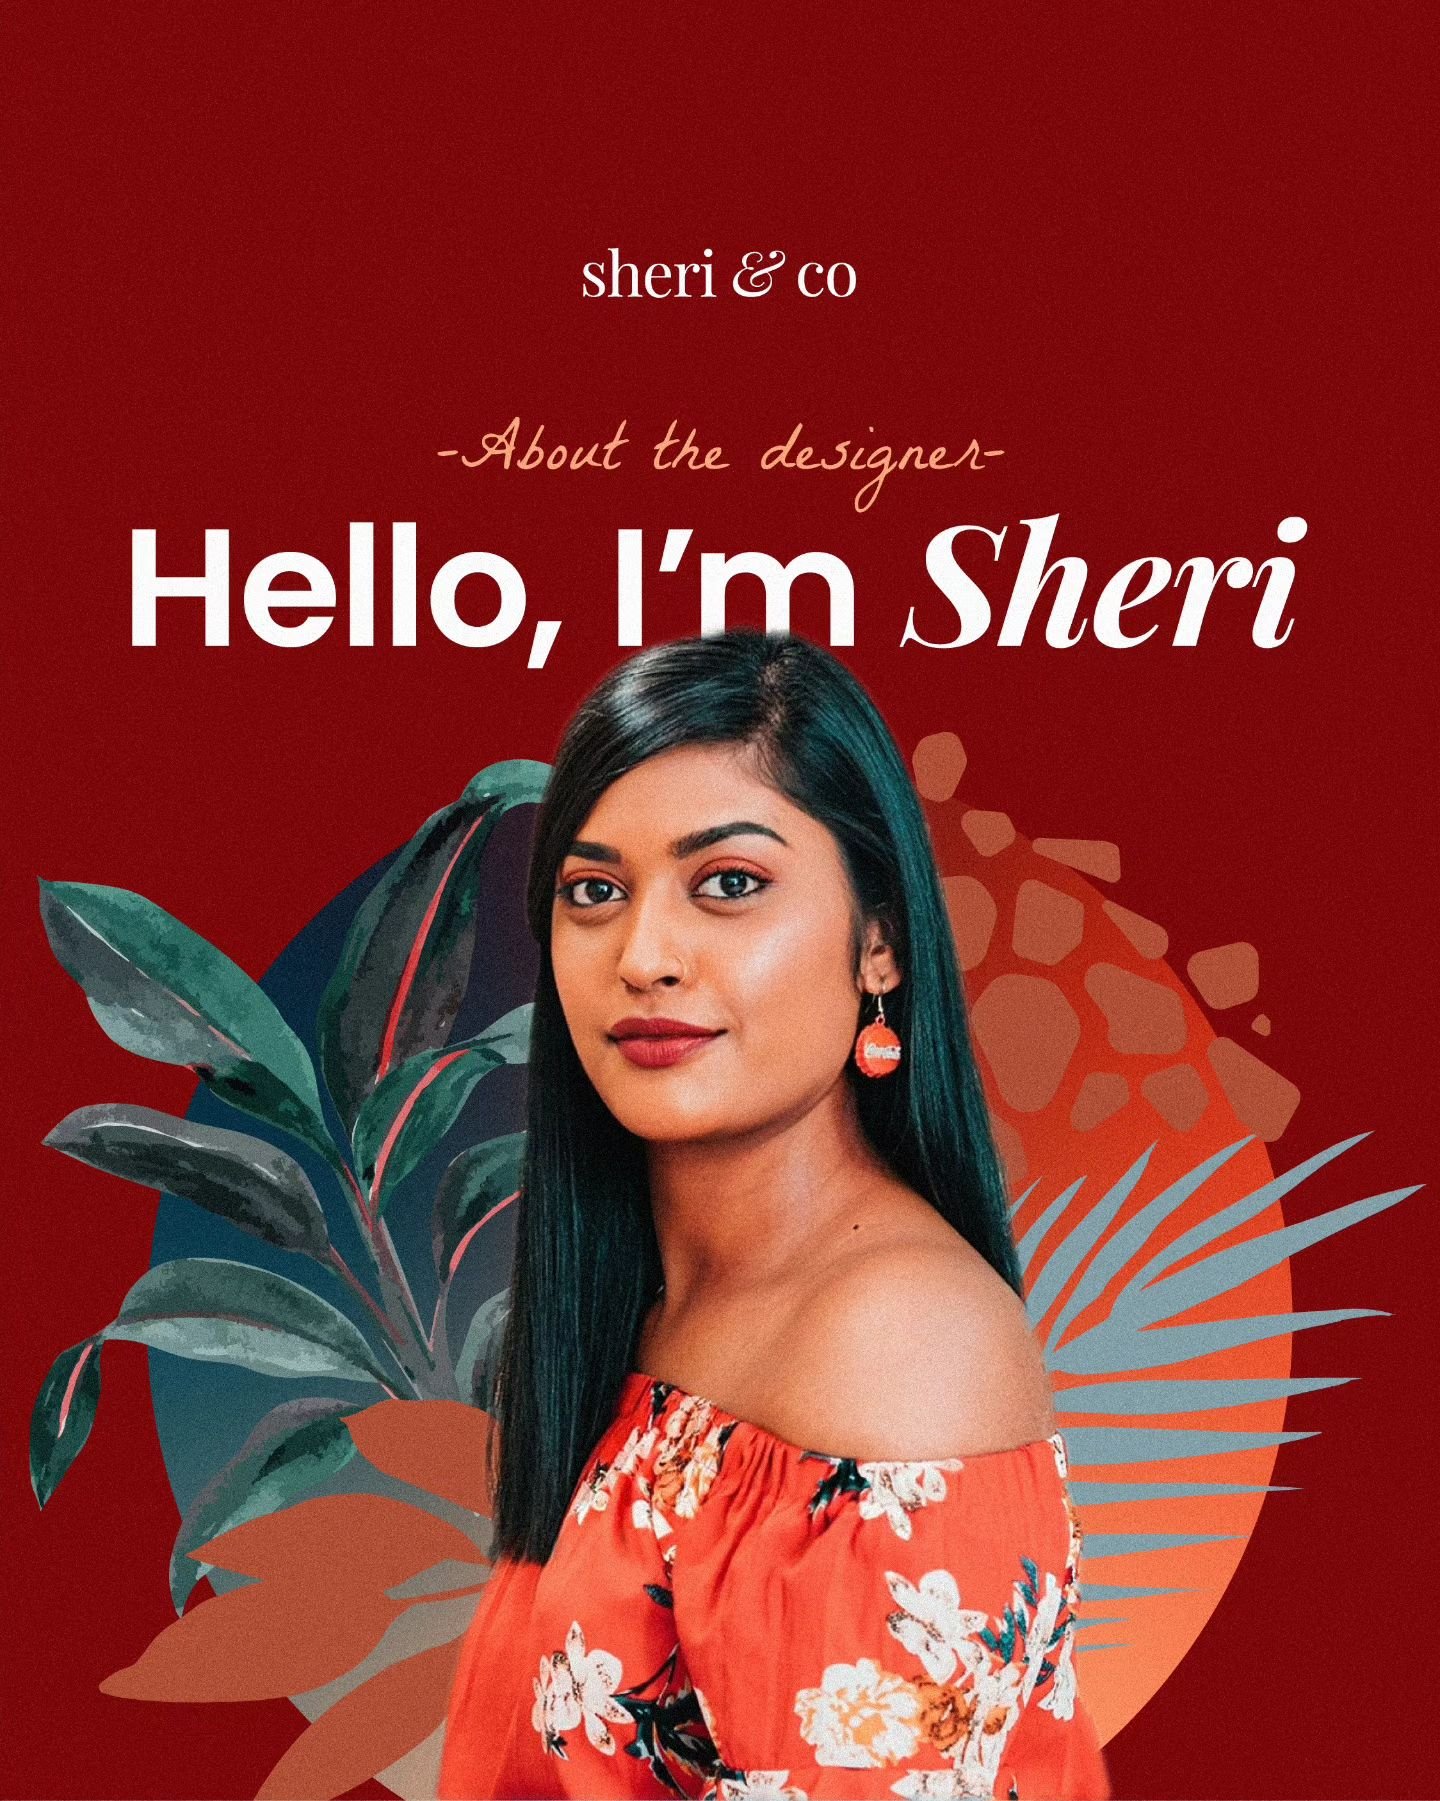 Hey there! I'm Sheri👋, the creative force and giraffe behind Sheri &amp; Co. I create captivating brand identities and visuals to elevate your brand's image, all while fueling myself with copious amounts of hot chocolate!🍫

I would love to learn mo